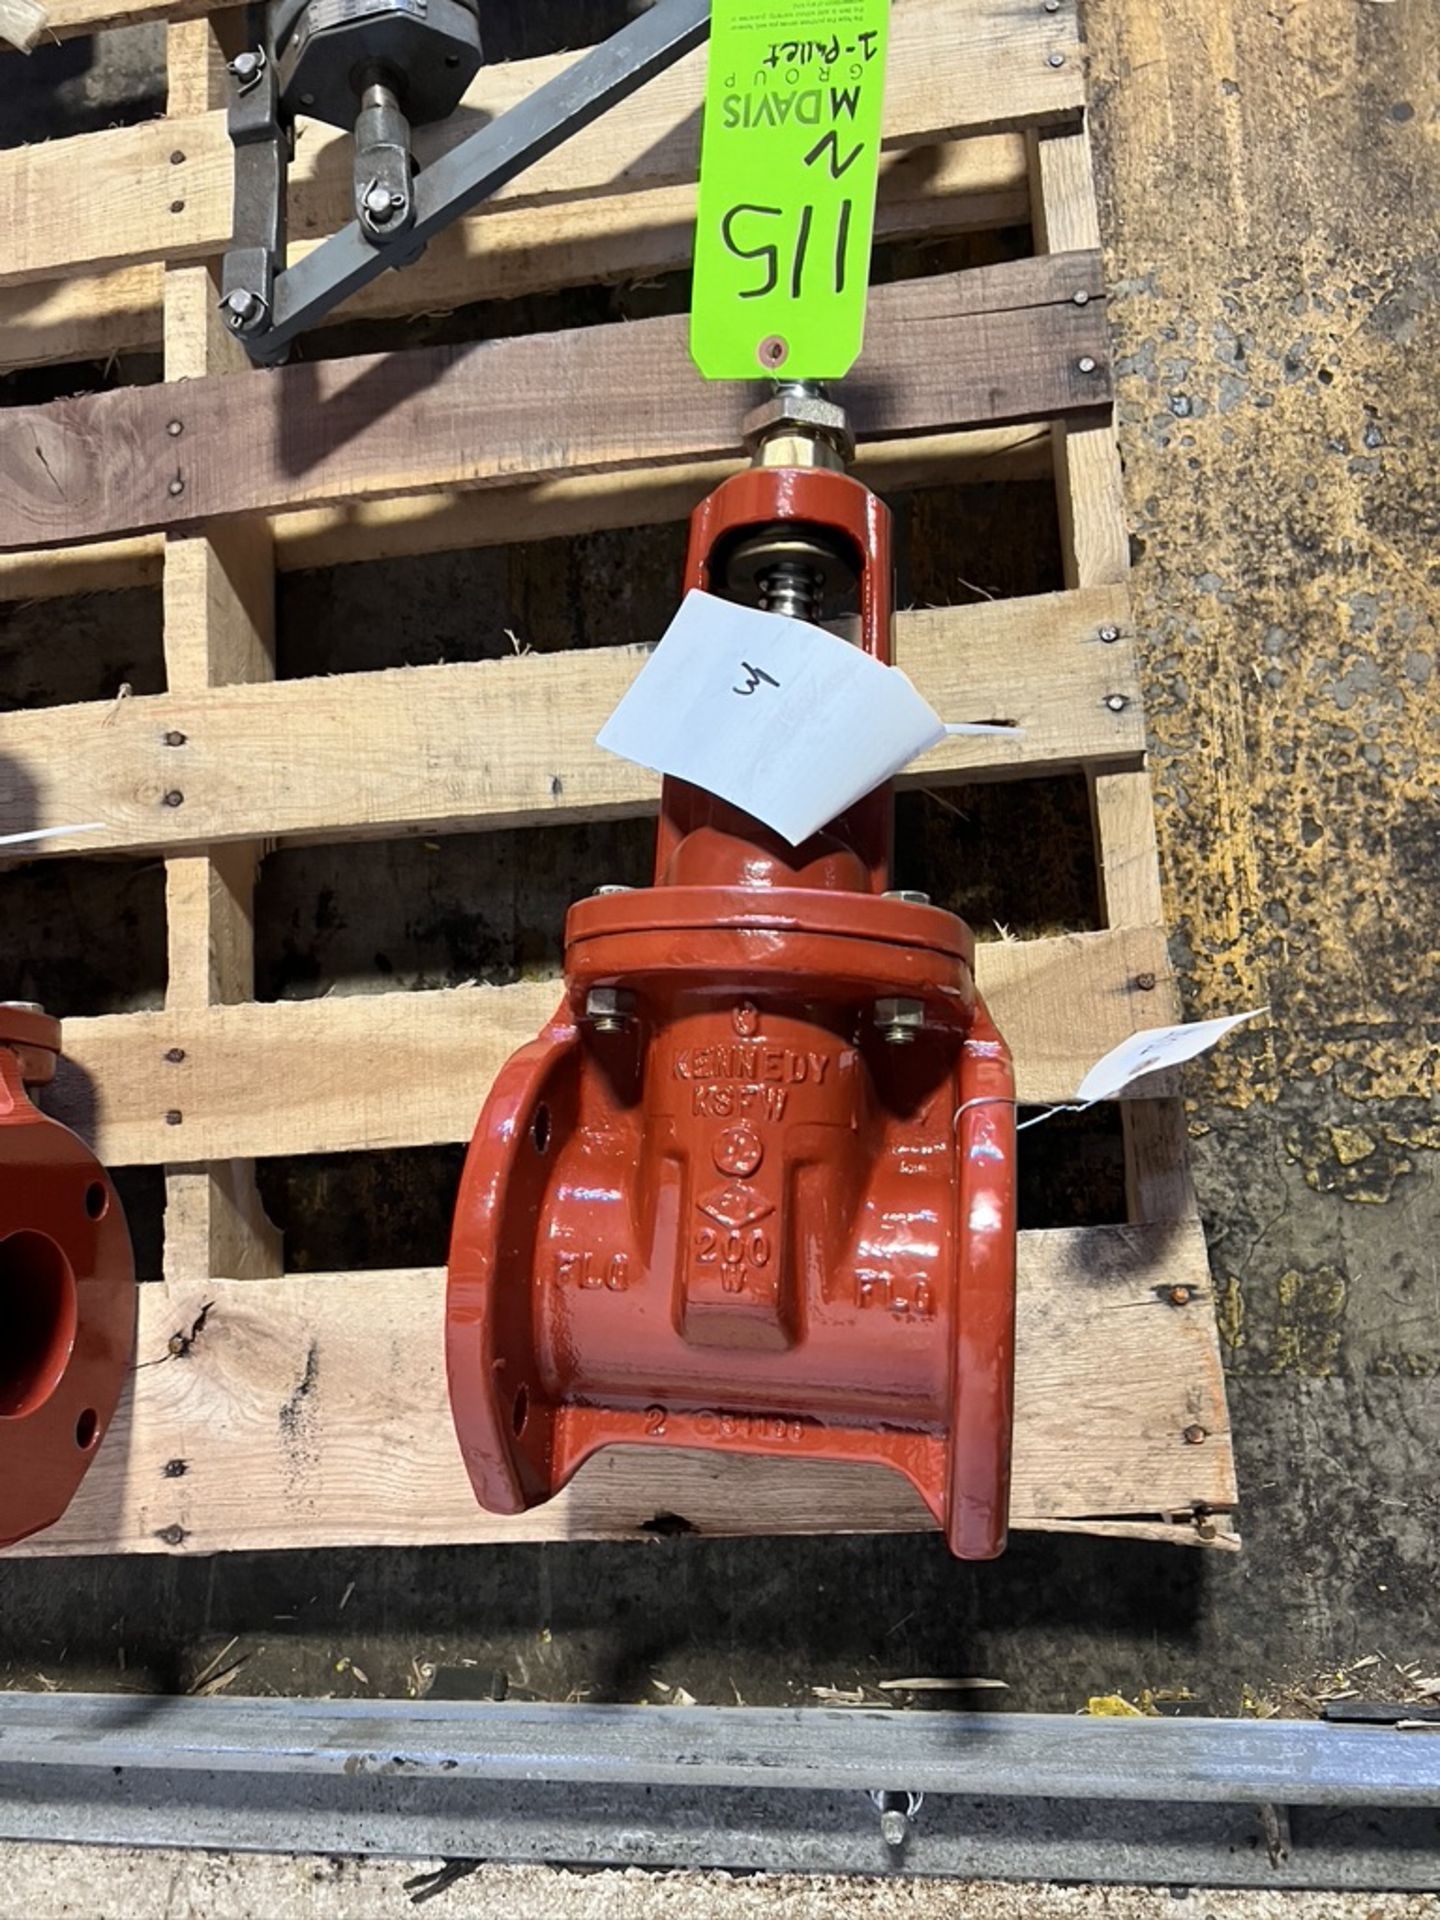 (2) NEW Kennedy Fire Main Gate Valve # KS-FW-200W, 3" Flanged(1) Flowserve Butterfly Valve 4" # 4- - Image 2 of 9